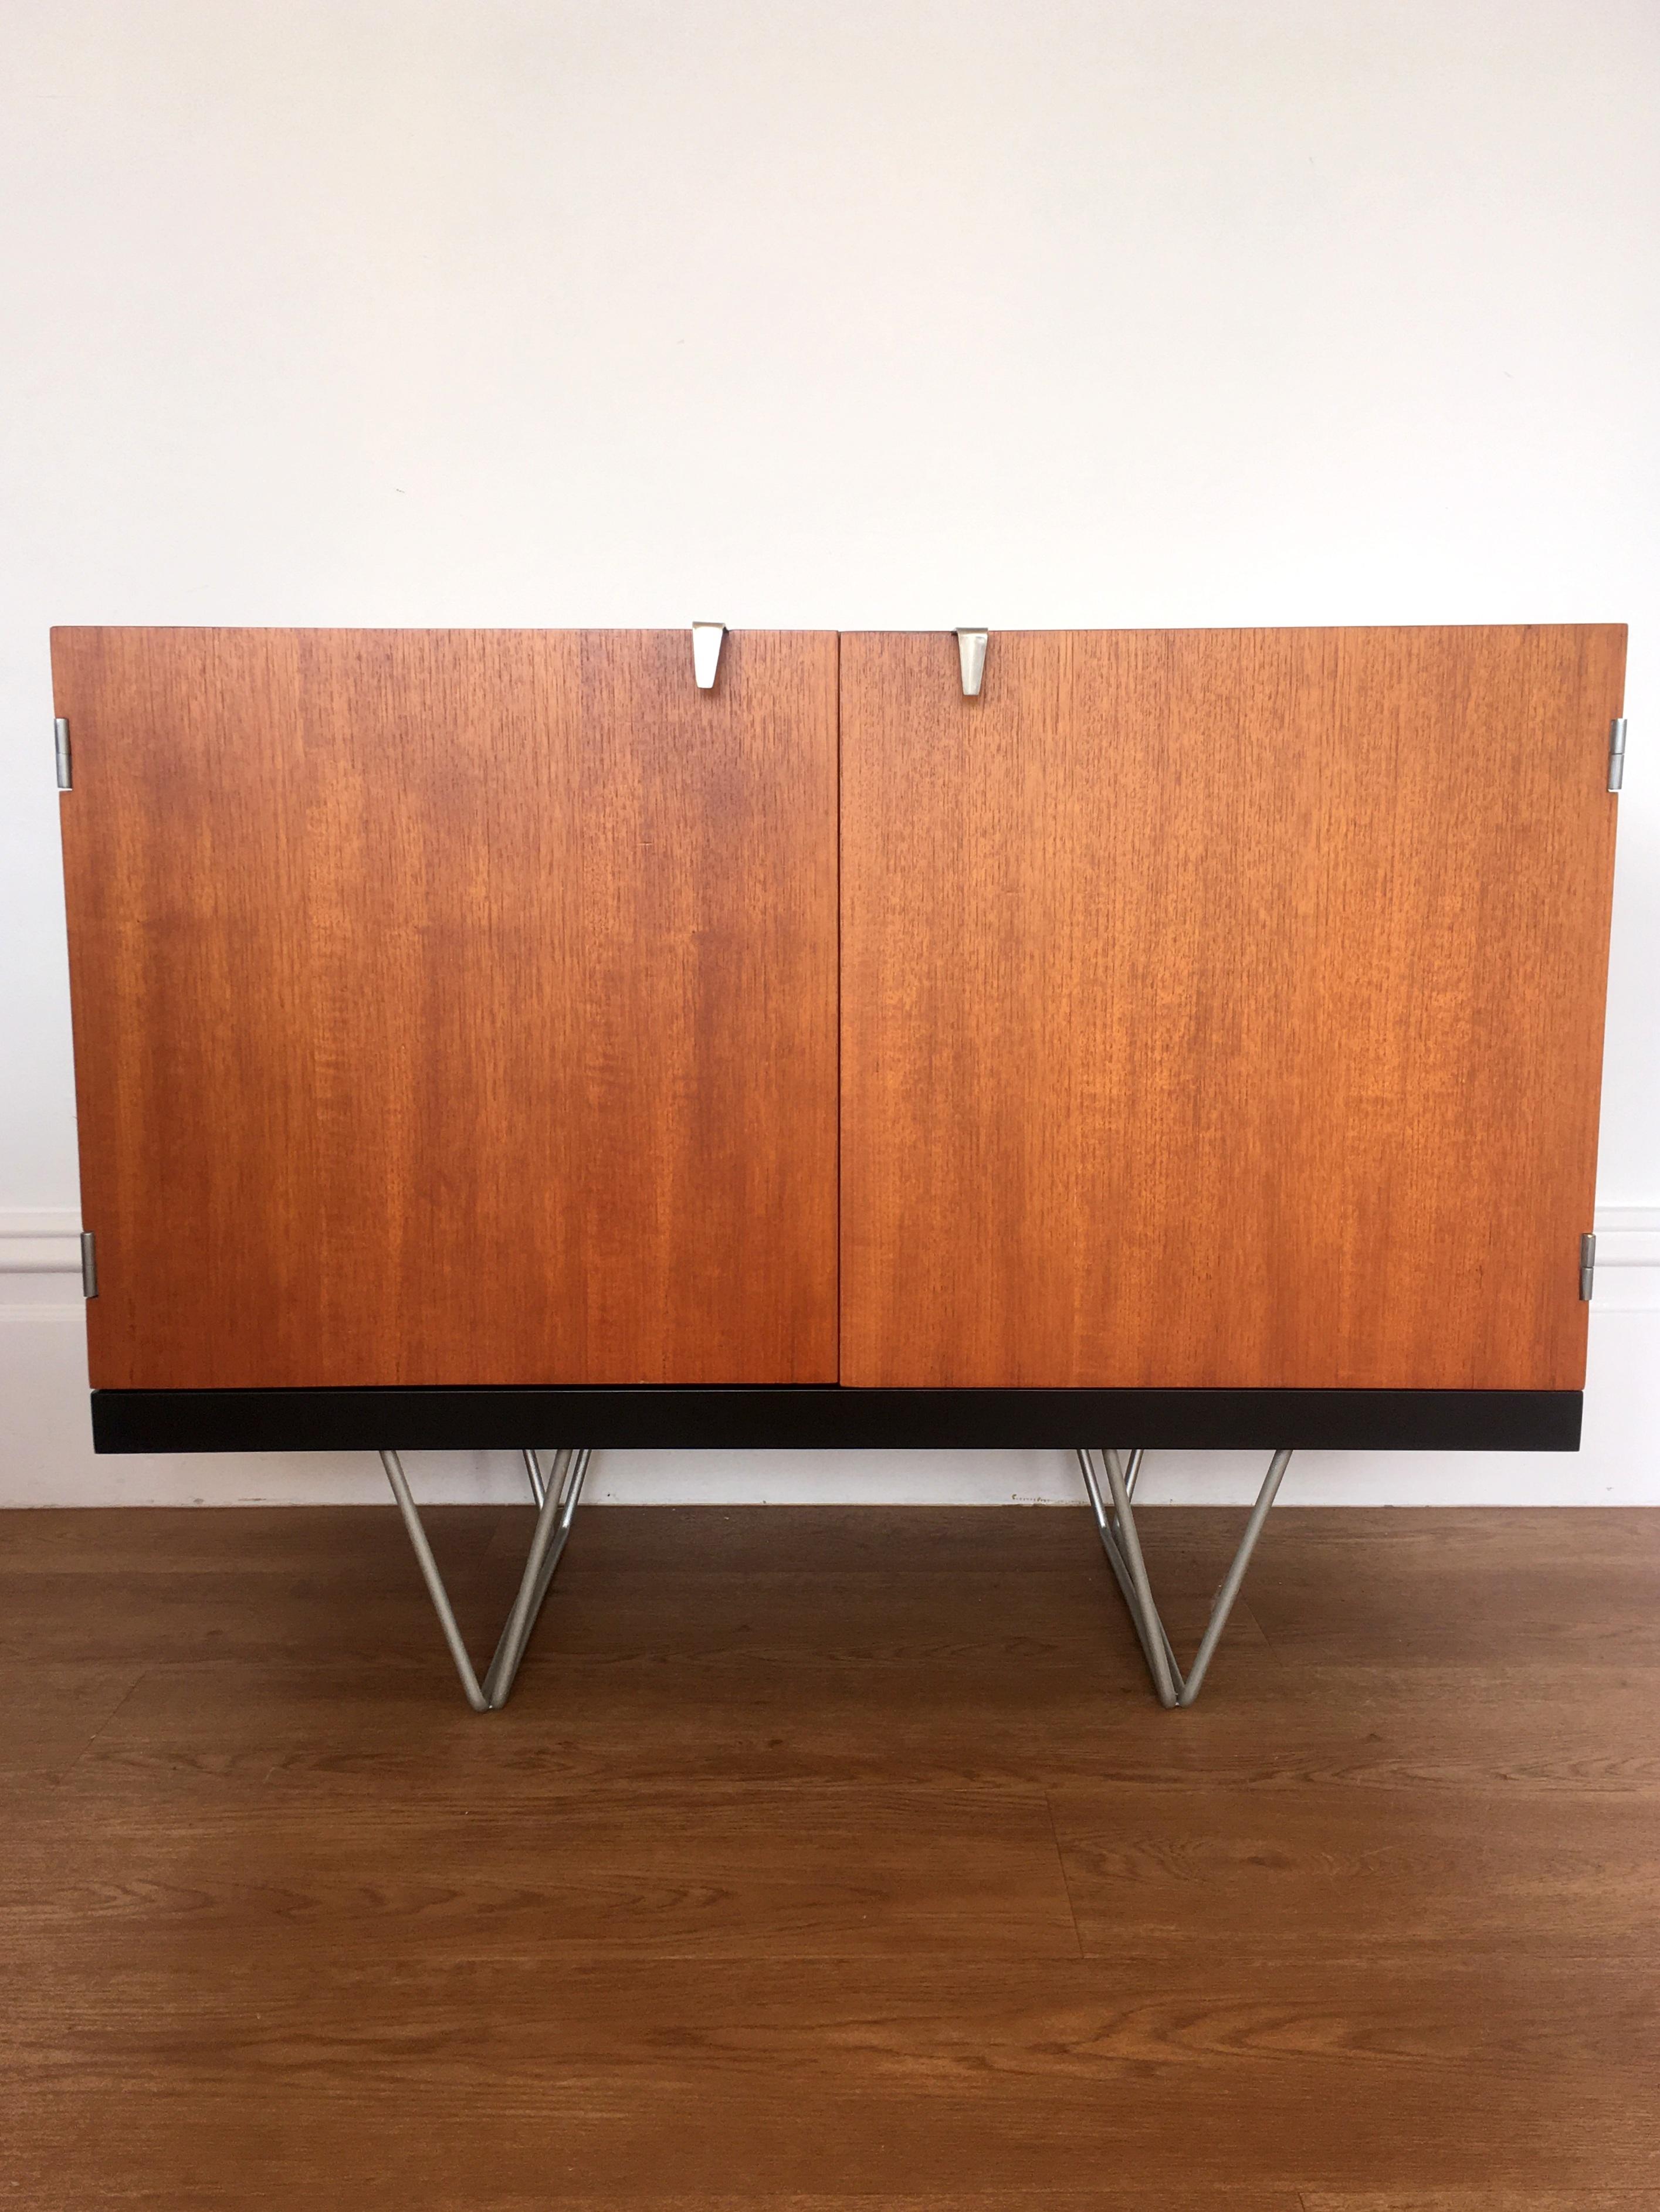 Model S203 sideboard designed by John and Sylvia Reid in the 1960s for Stag, UK

The sideboard features external teak veneers with a contrasting beech interior on brushed satin nickel v shaped legs.

The sideboard has been professionally